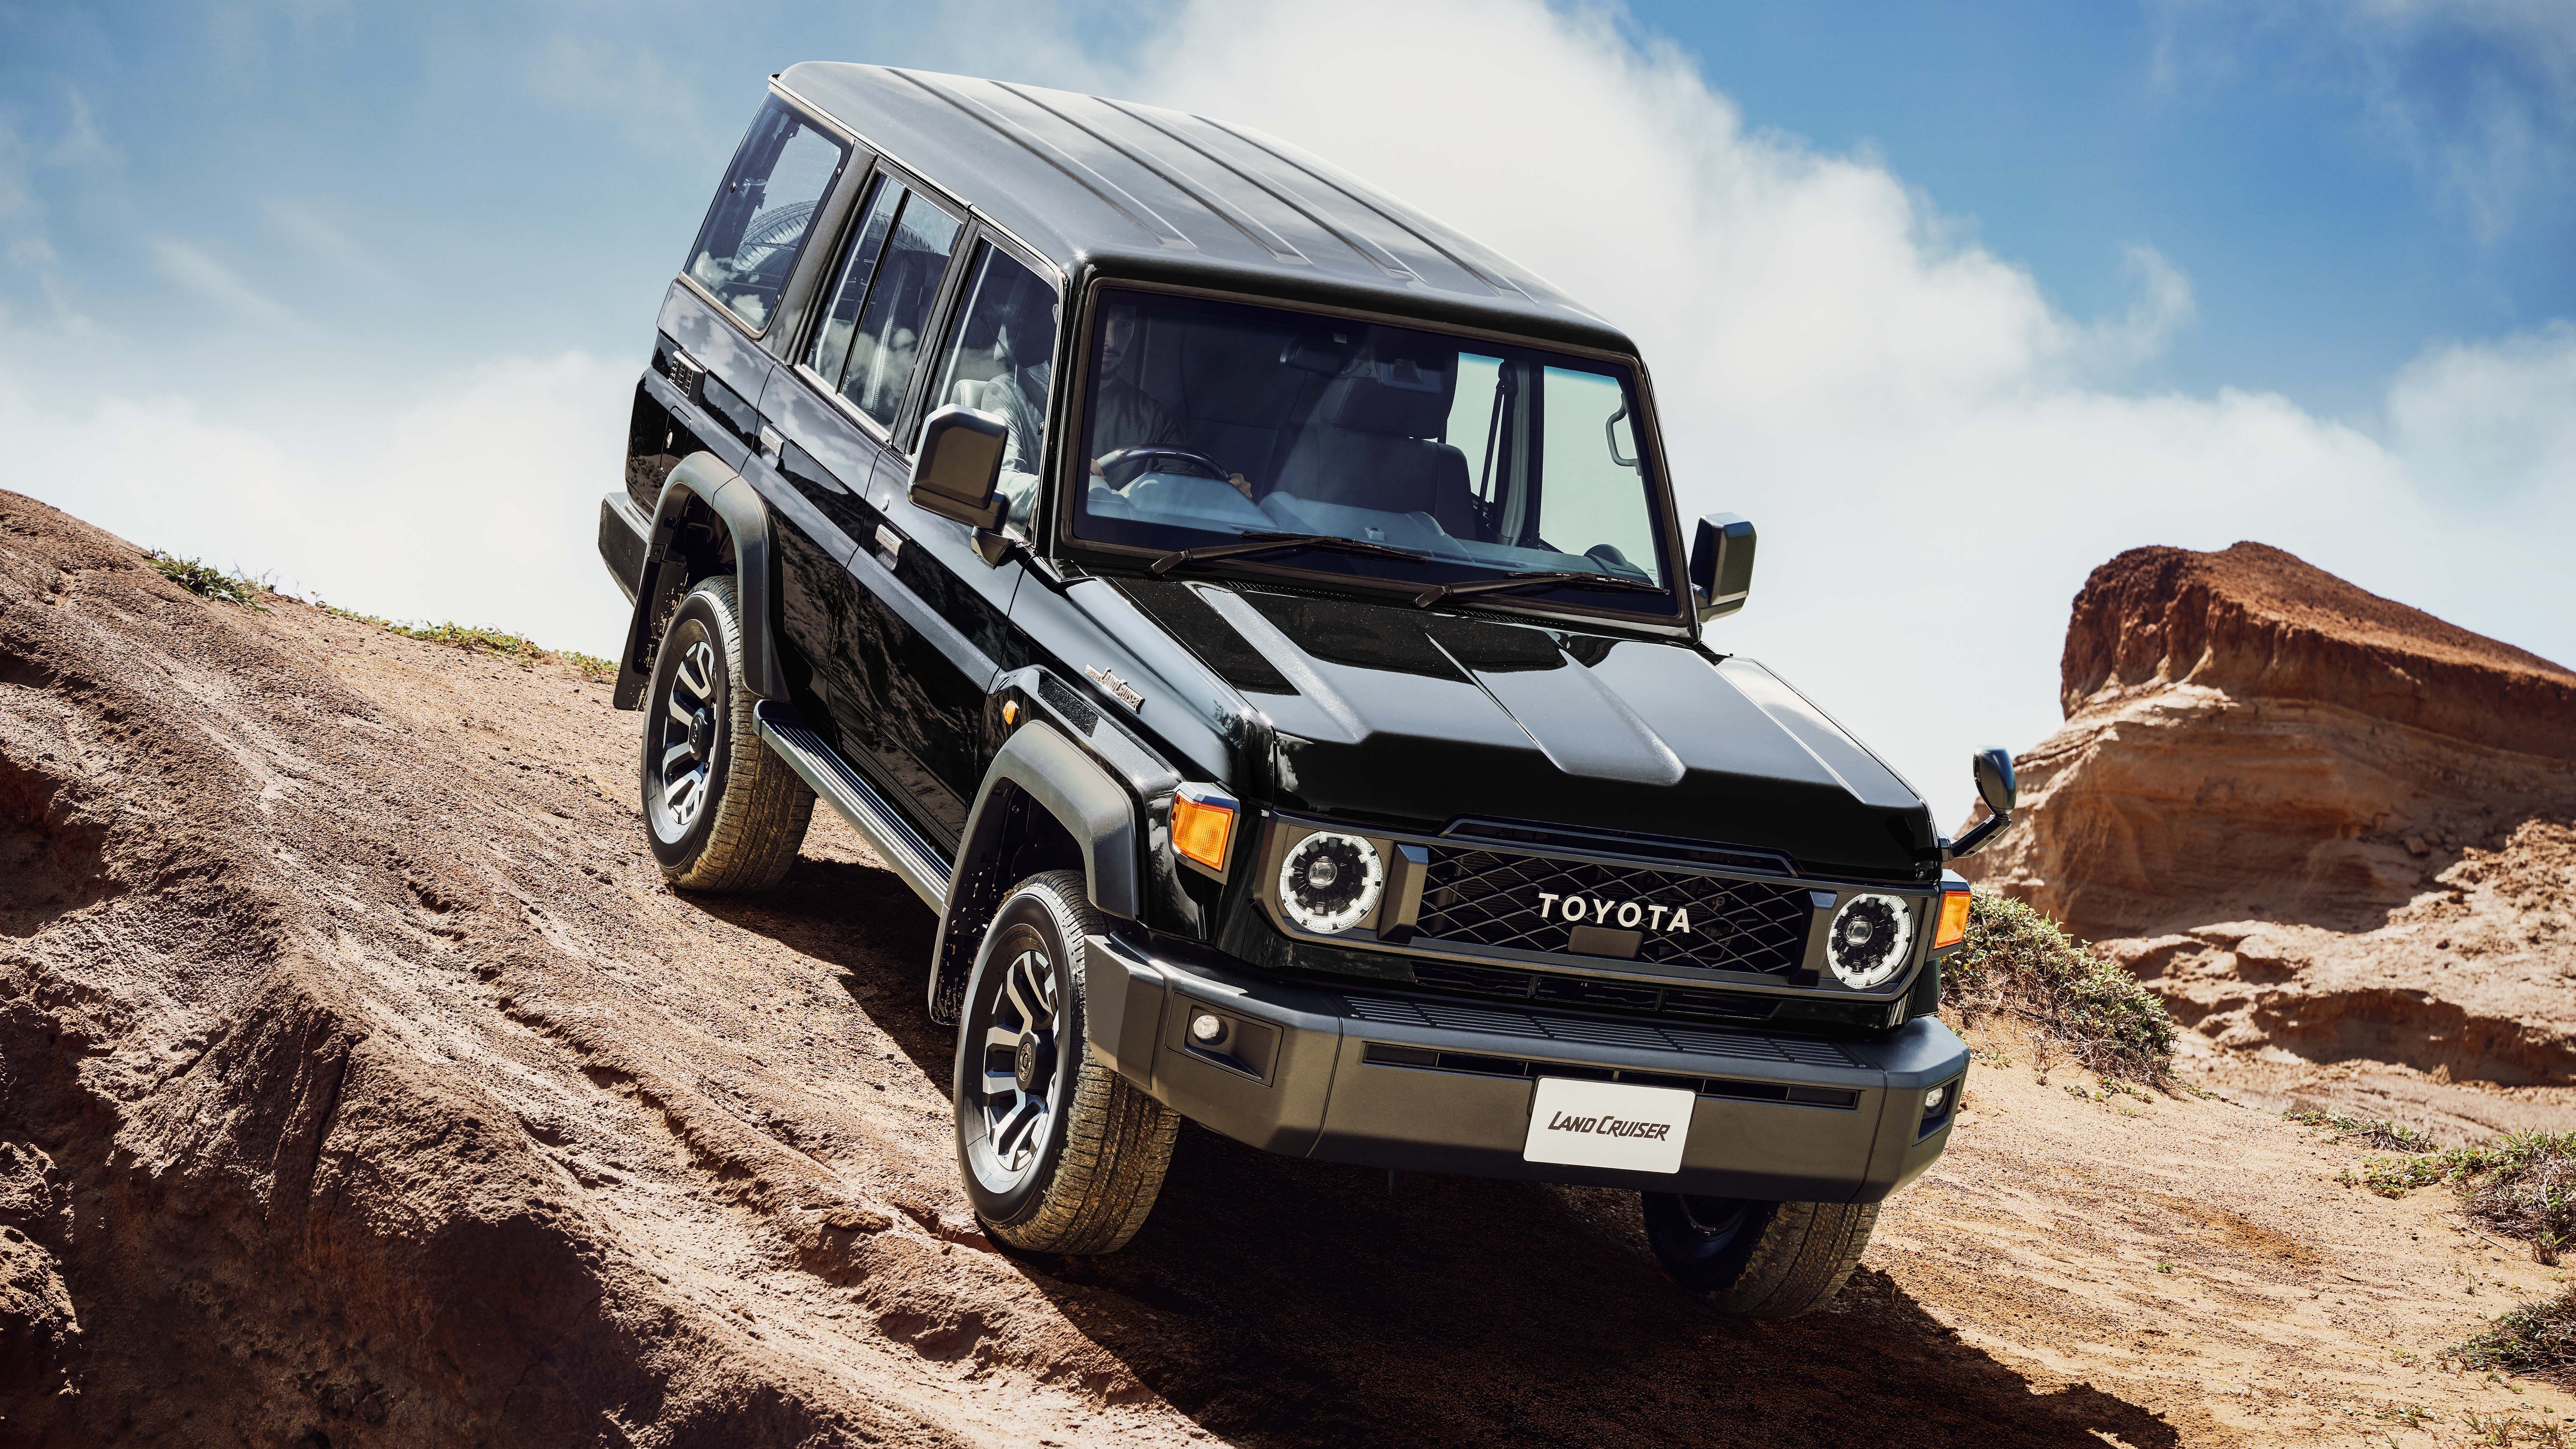 Toyota Land Cruiser 70 Is the 1980s SUV That Just Won't Die